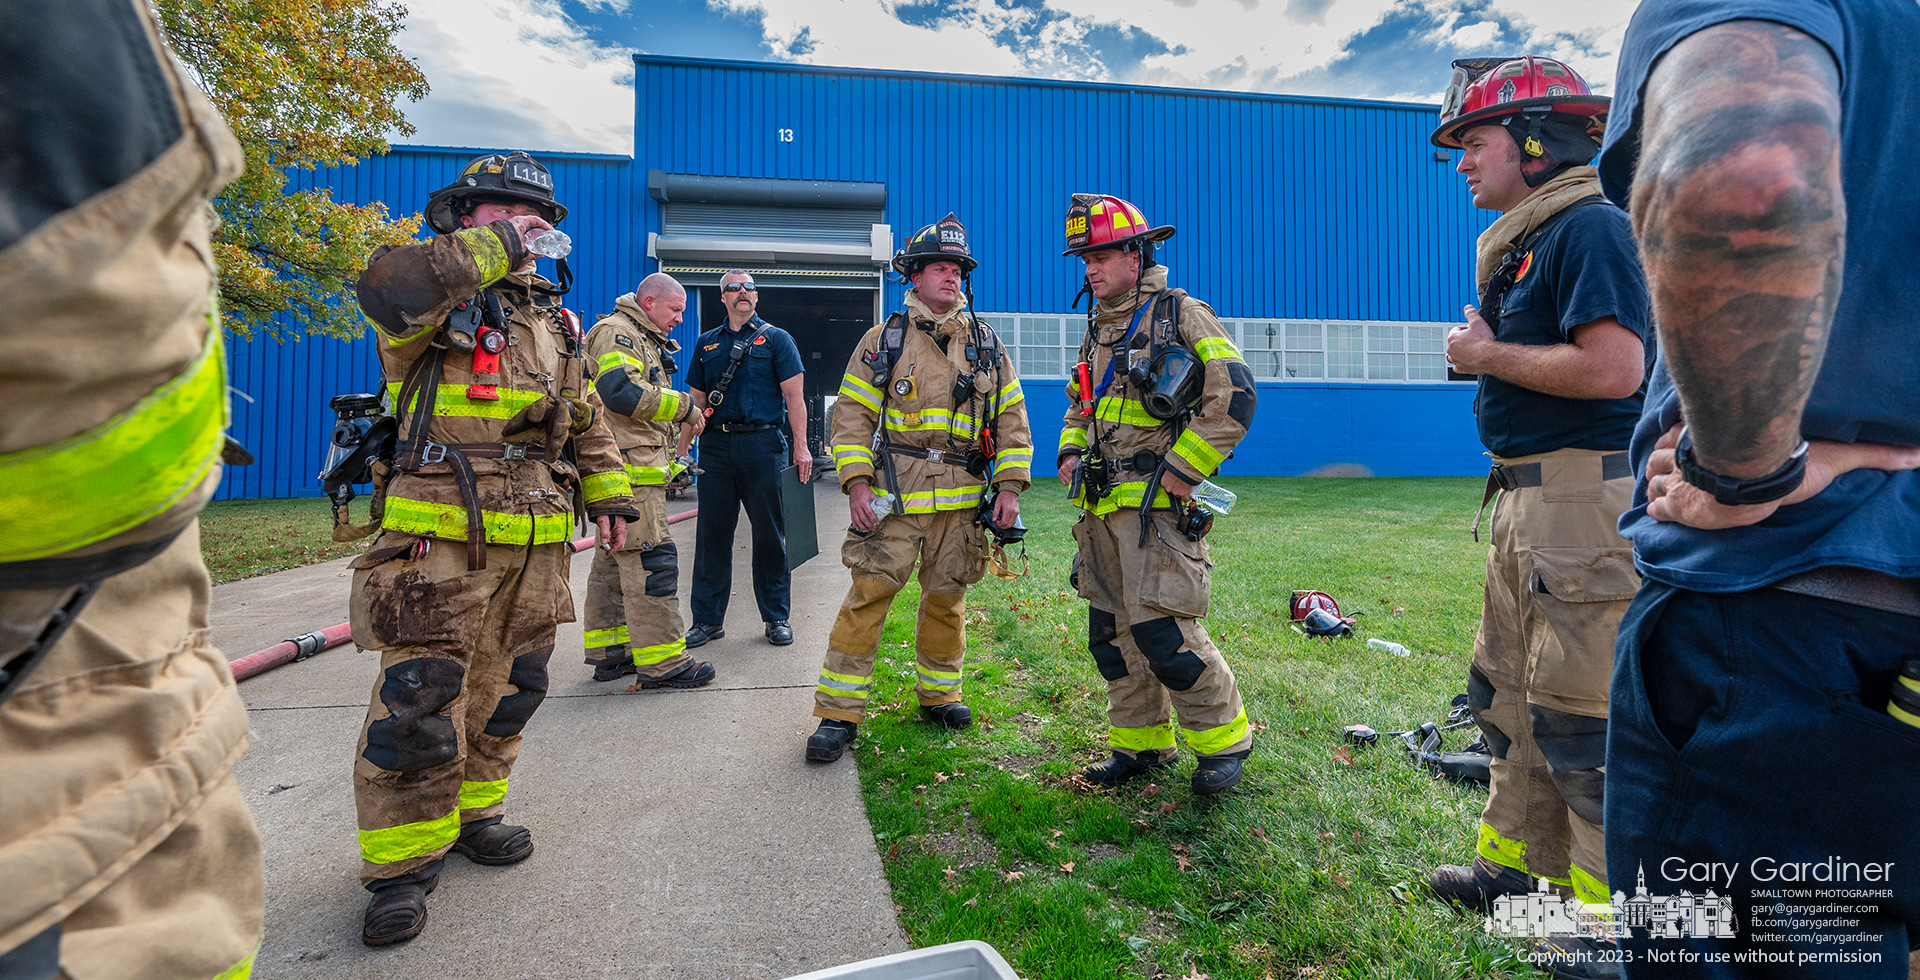 Westerville firefighters hold an unofficial after-action report meeting after putting out a fire at Worthington Industries on Maxtown Road. My Final Photo for October 25, 2023.